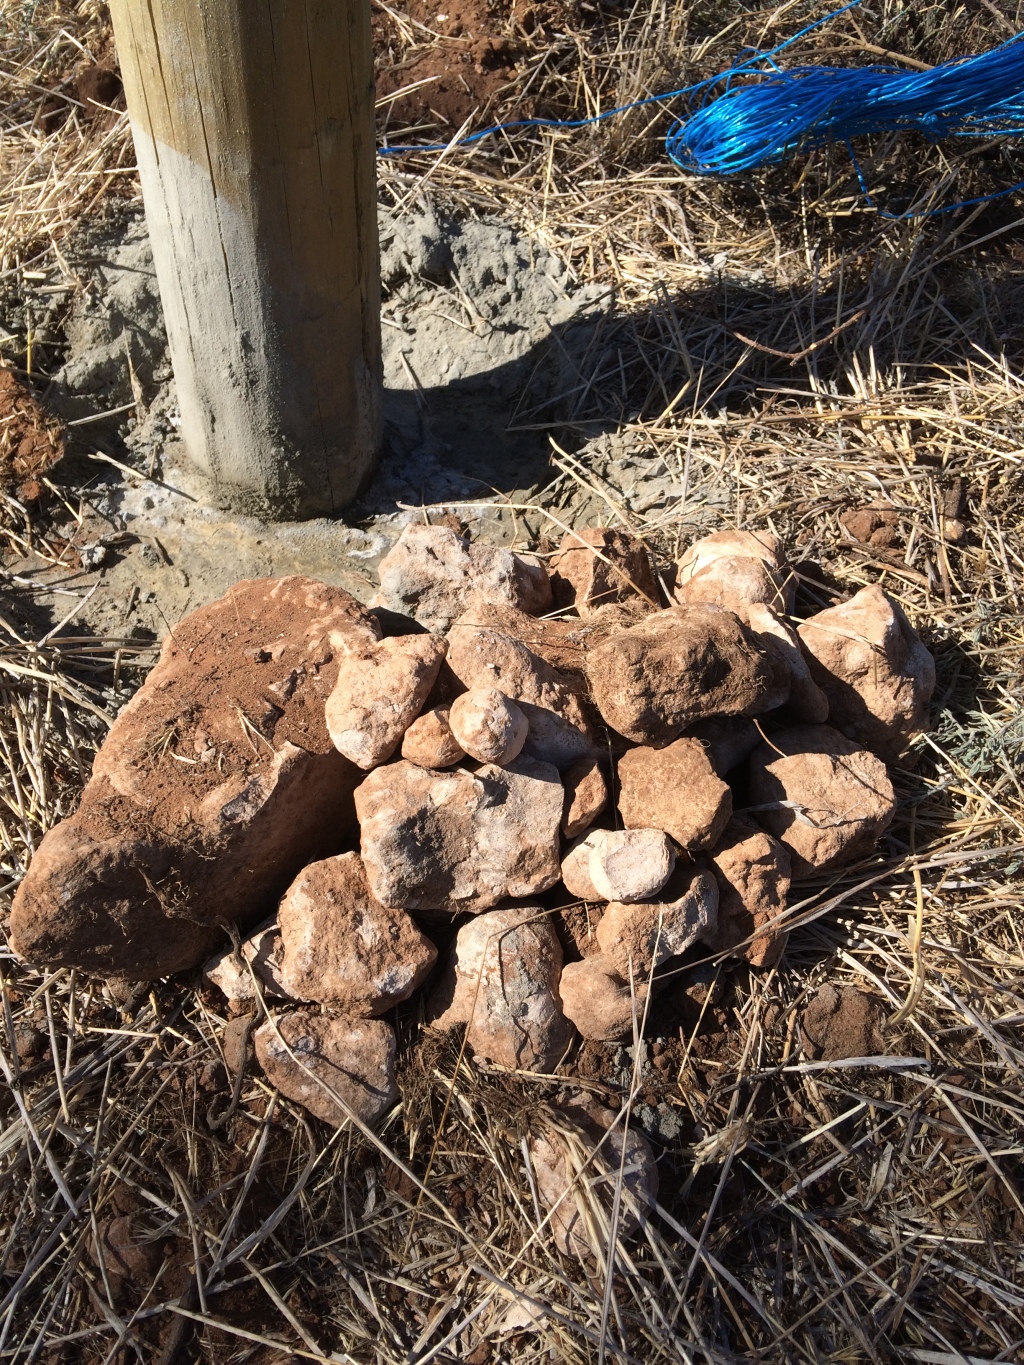 This is most of the rocks that came out of the hole I dug for the post in the background. That's from one hole, and I had to dig them out with a crowbar. 